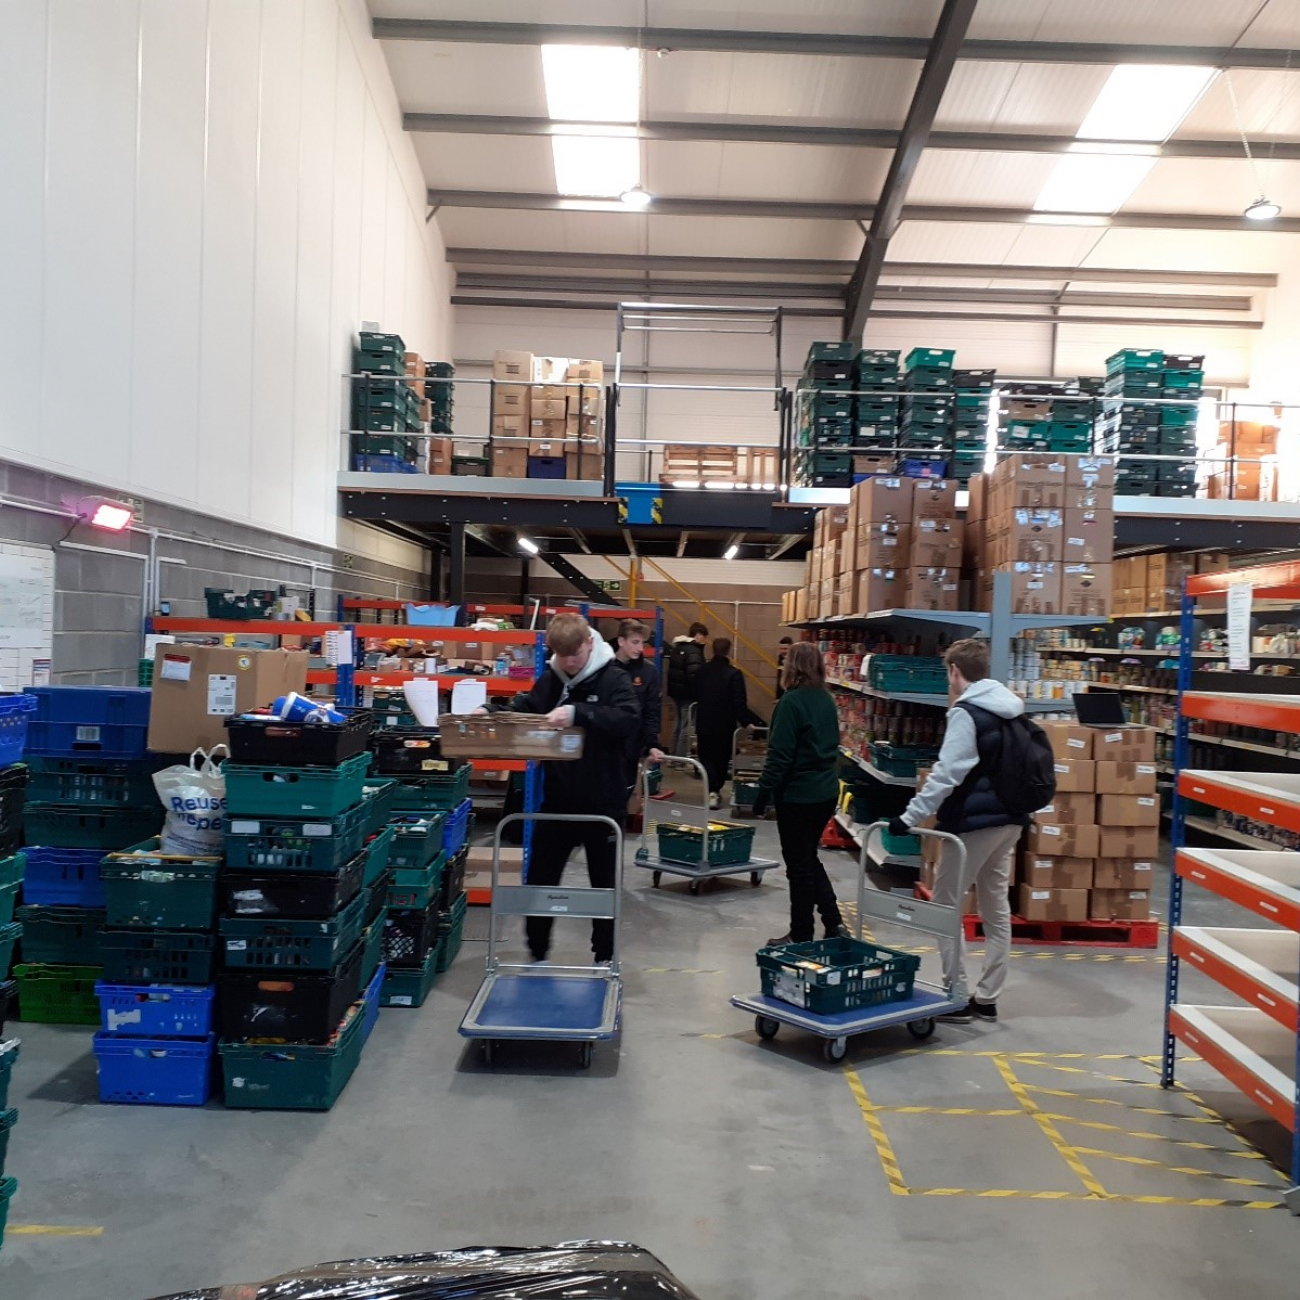 Learners stocking food onto trolleys in a warehouse